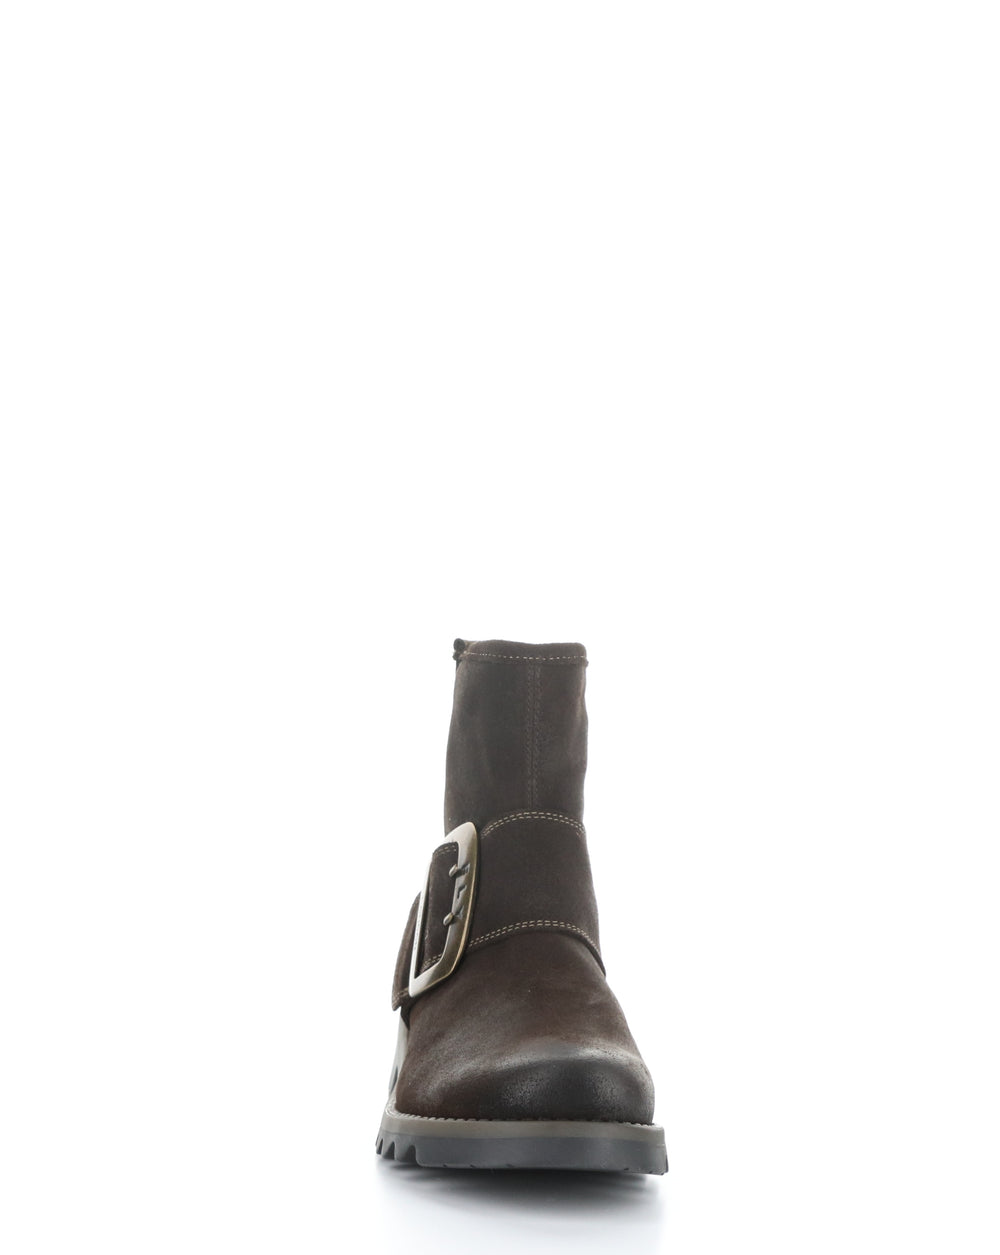 RILY991FLY 007 EXPRESSO Round Toe Boots